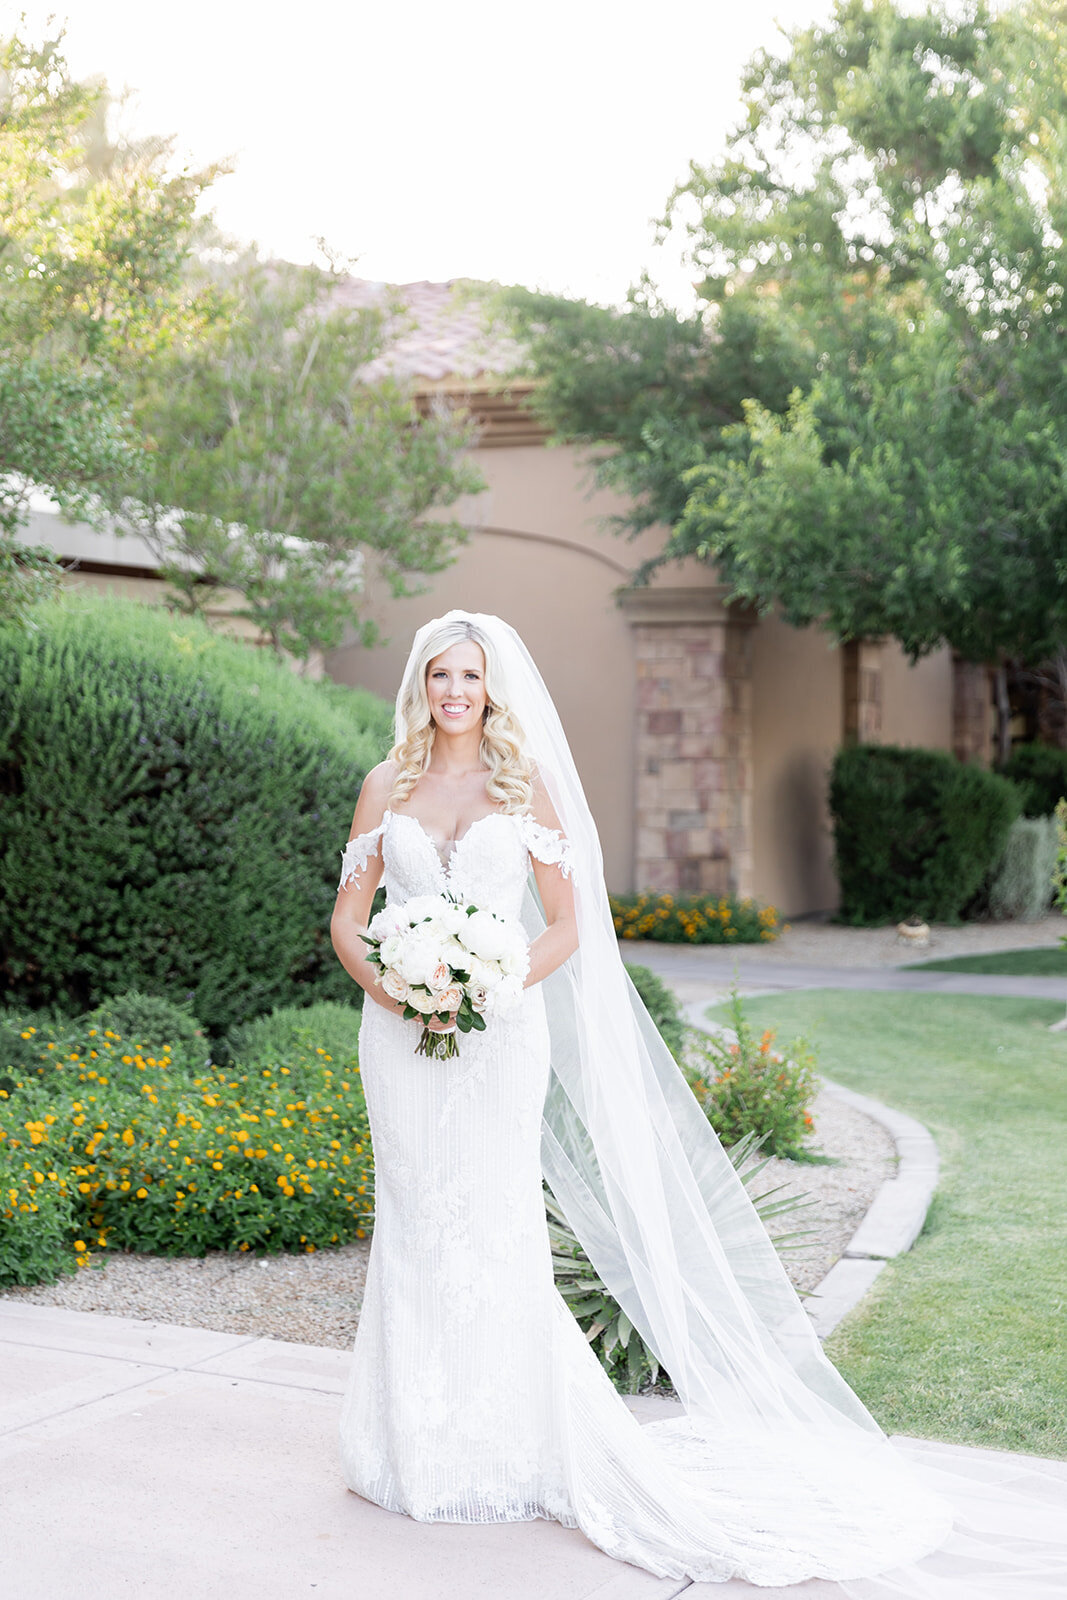 Karlie Colleen Photography - Holly & Ronnie Wedding - Seville Country Club - Gilbert Arizona-659